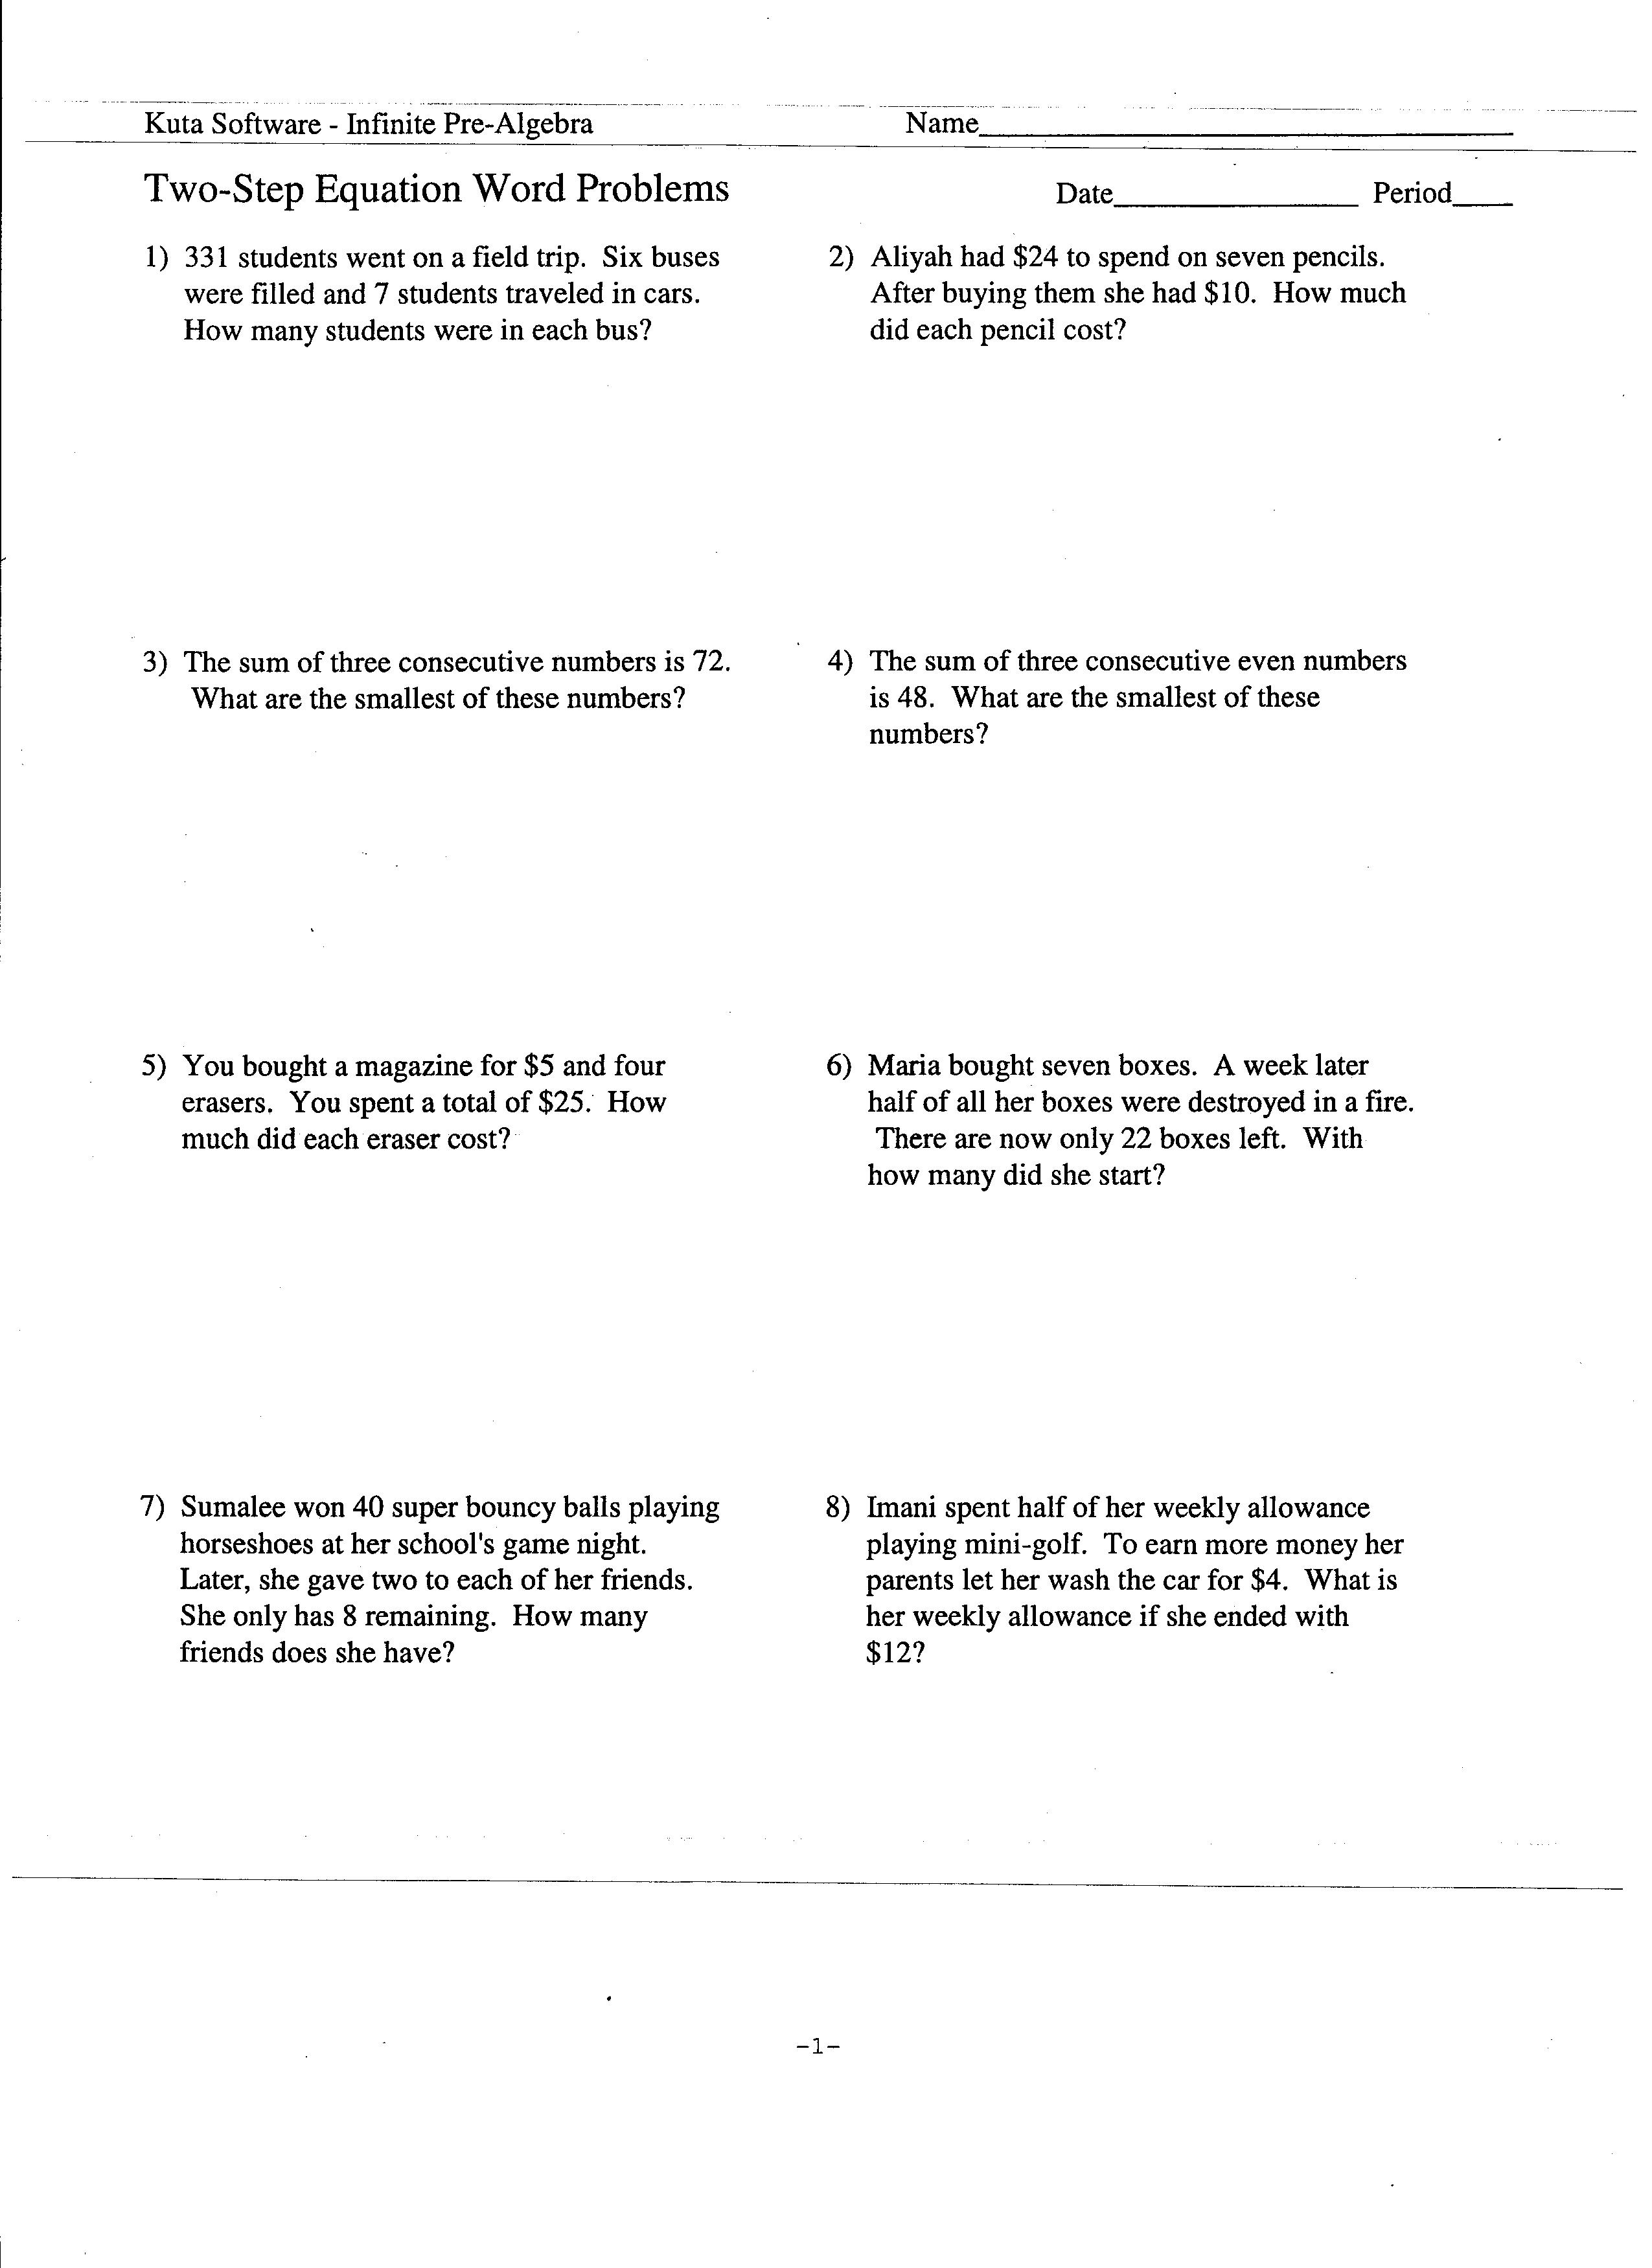 simple linear equations examples Throughout Linear Word Problems Worksheet